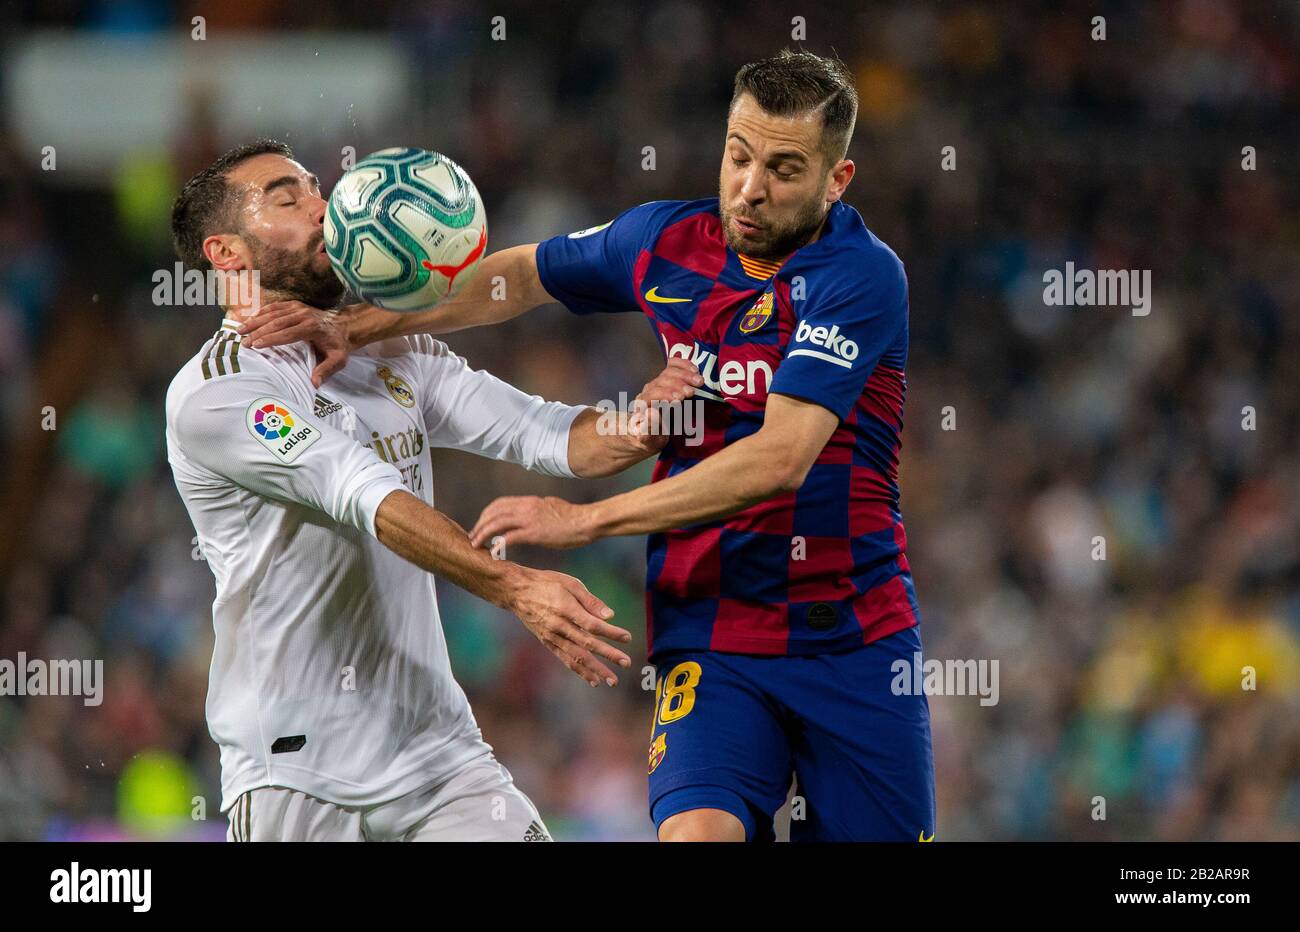 Dani Carvajal (L) and Jordi Alba (R) in action during the Spanish La Liga match round 26 between Real Madrid and FC Barcelona at Santiago Bernabeu Stadium in Madrid.Final score: Real Madrid 2-0 Barcelona. Stock Photo